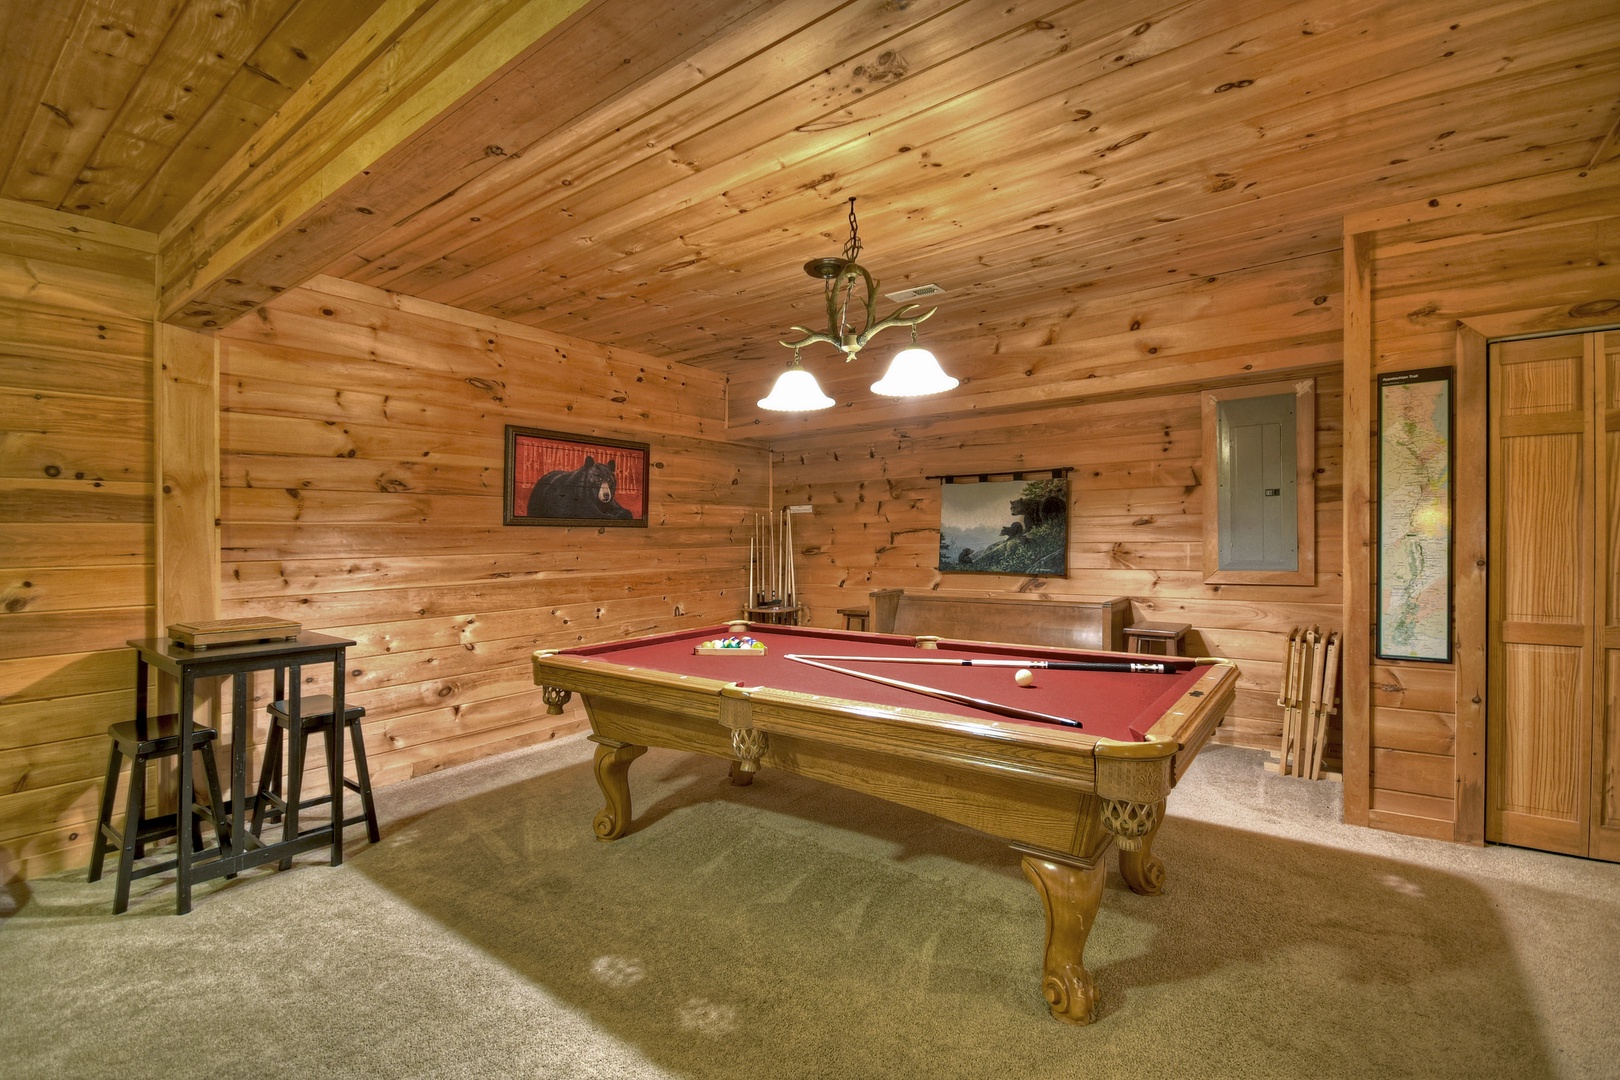 Amazing View- Lower level gaming area with pool table